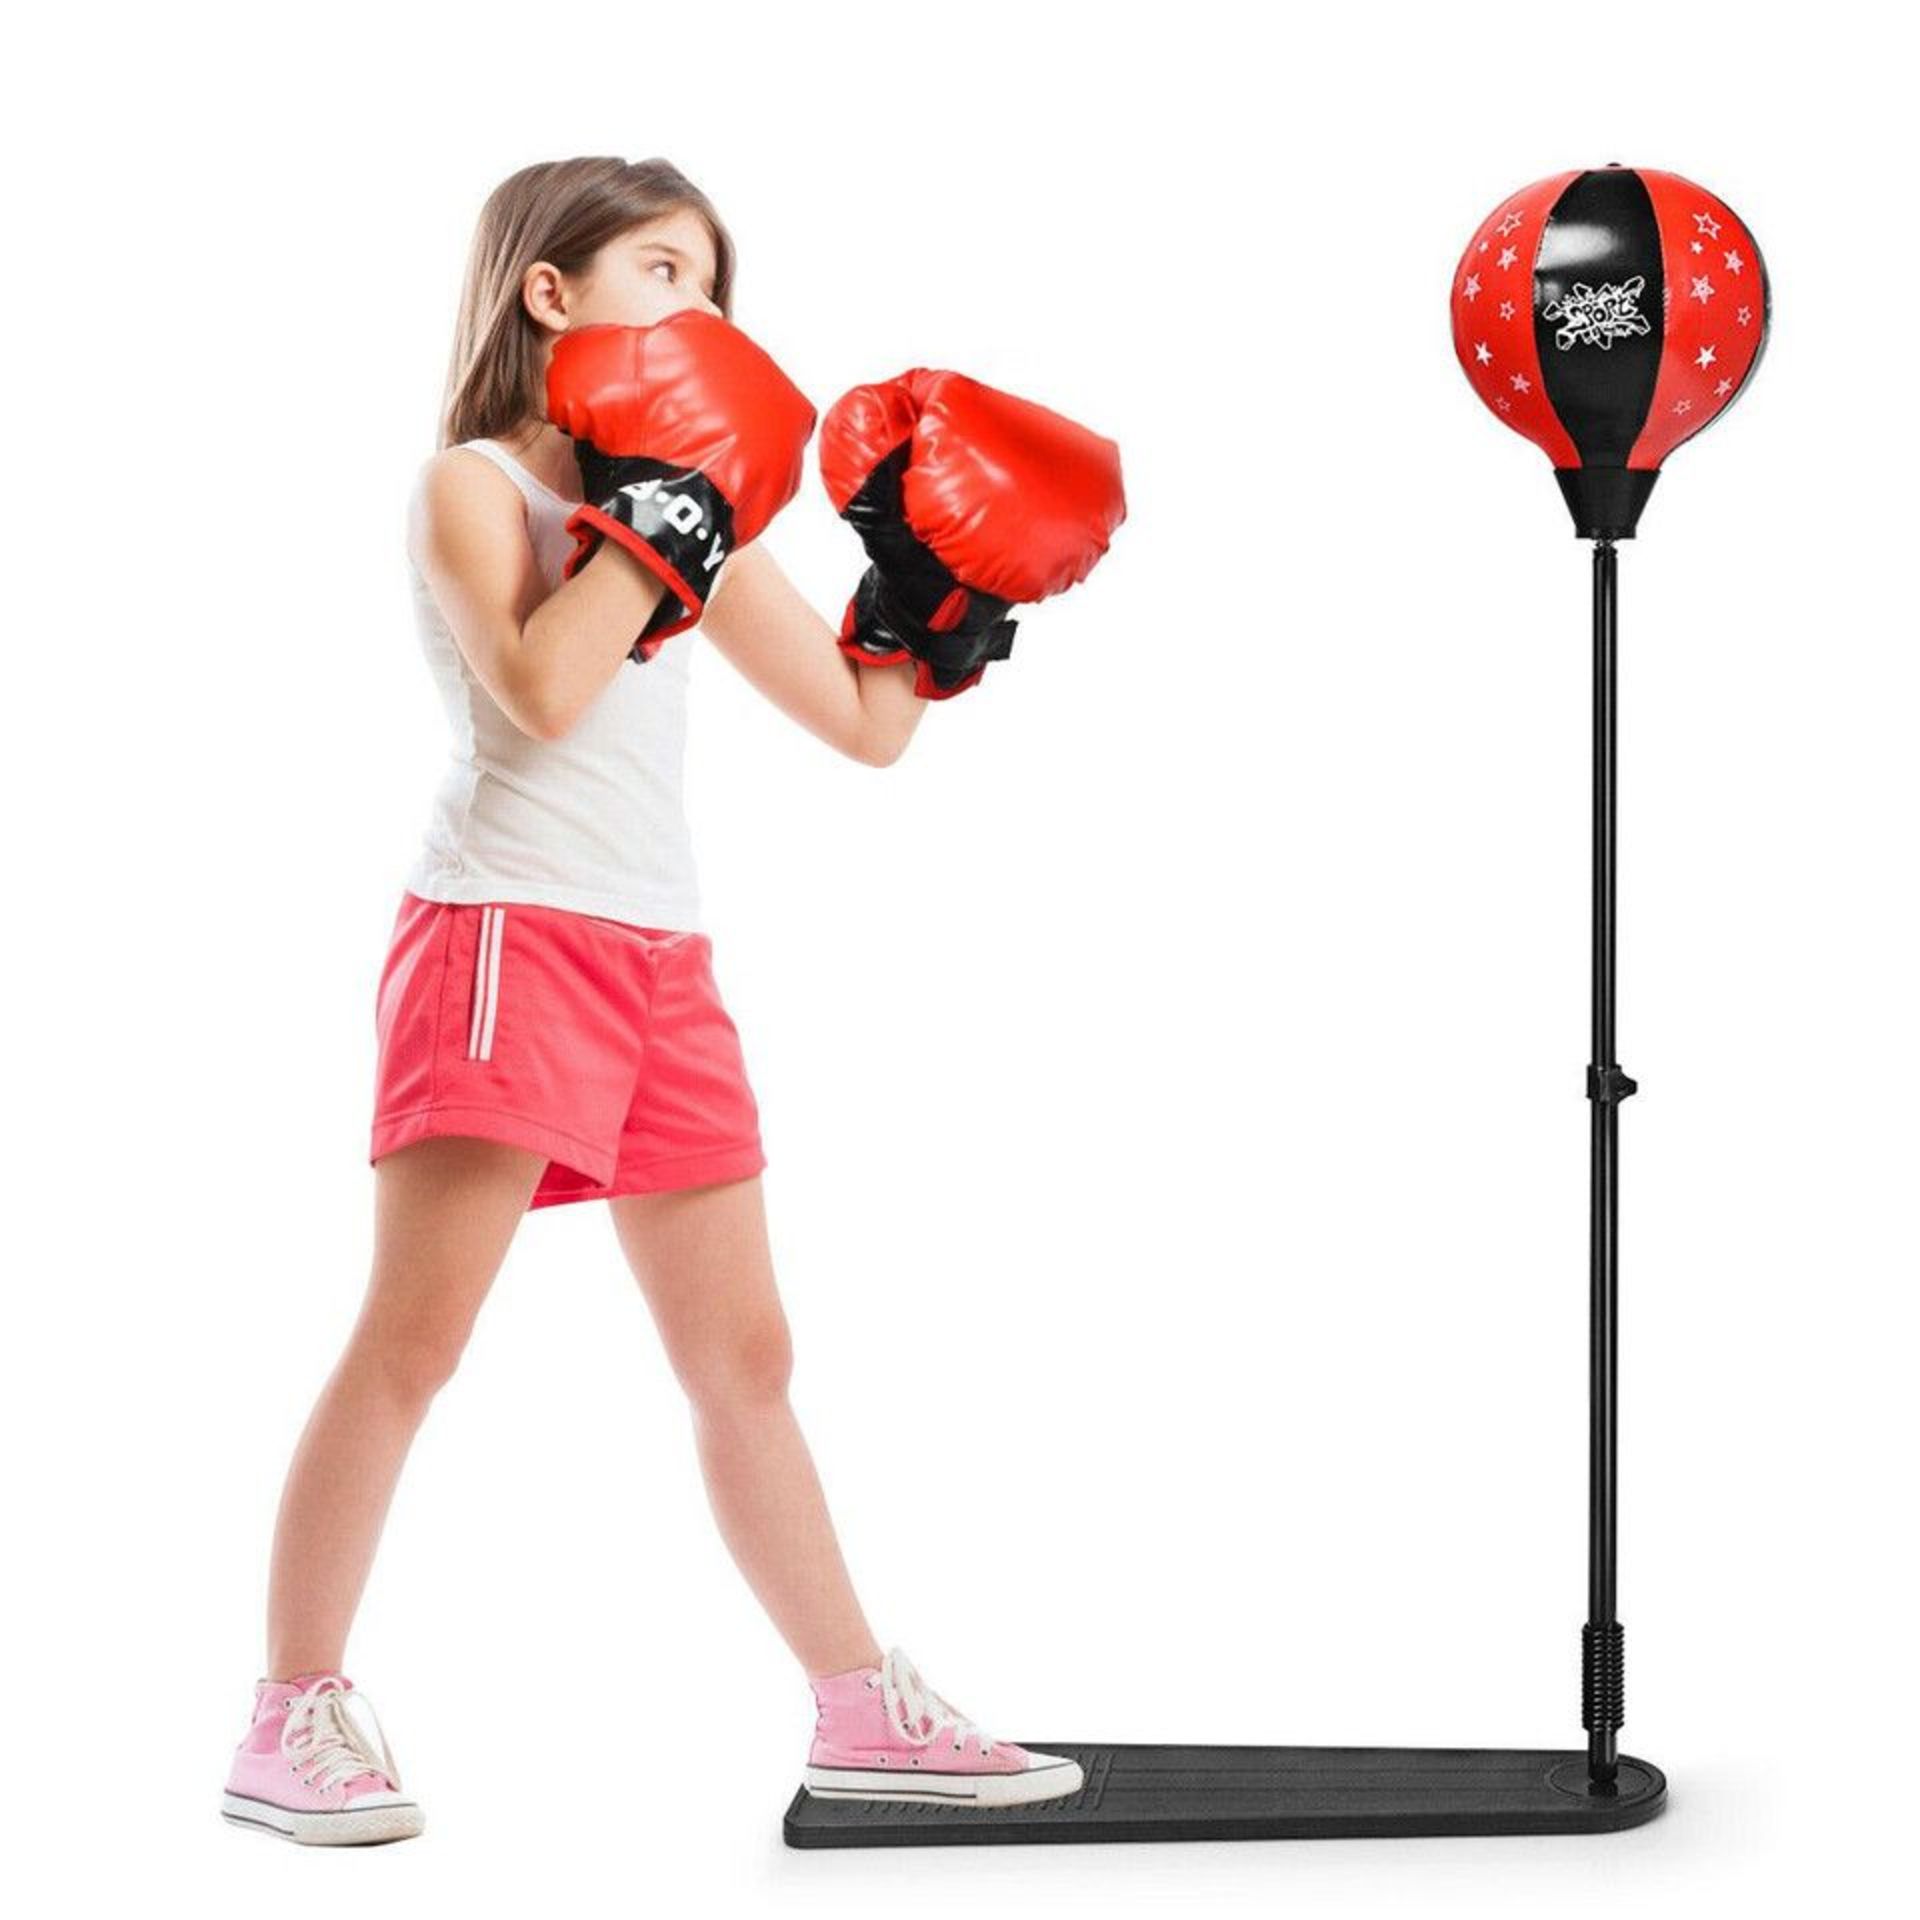 Kids Punching Bag With Adjustable Stand And Boxing Gloves. - ER25.